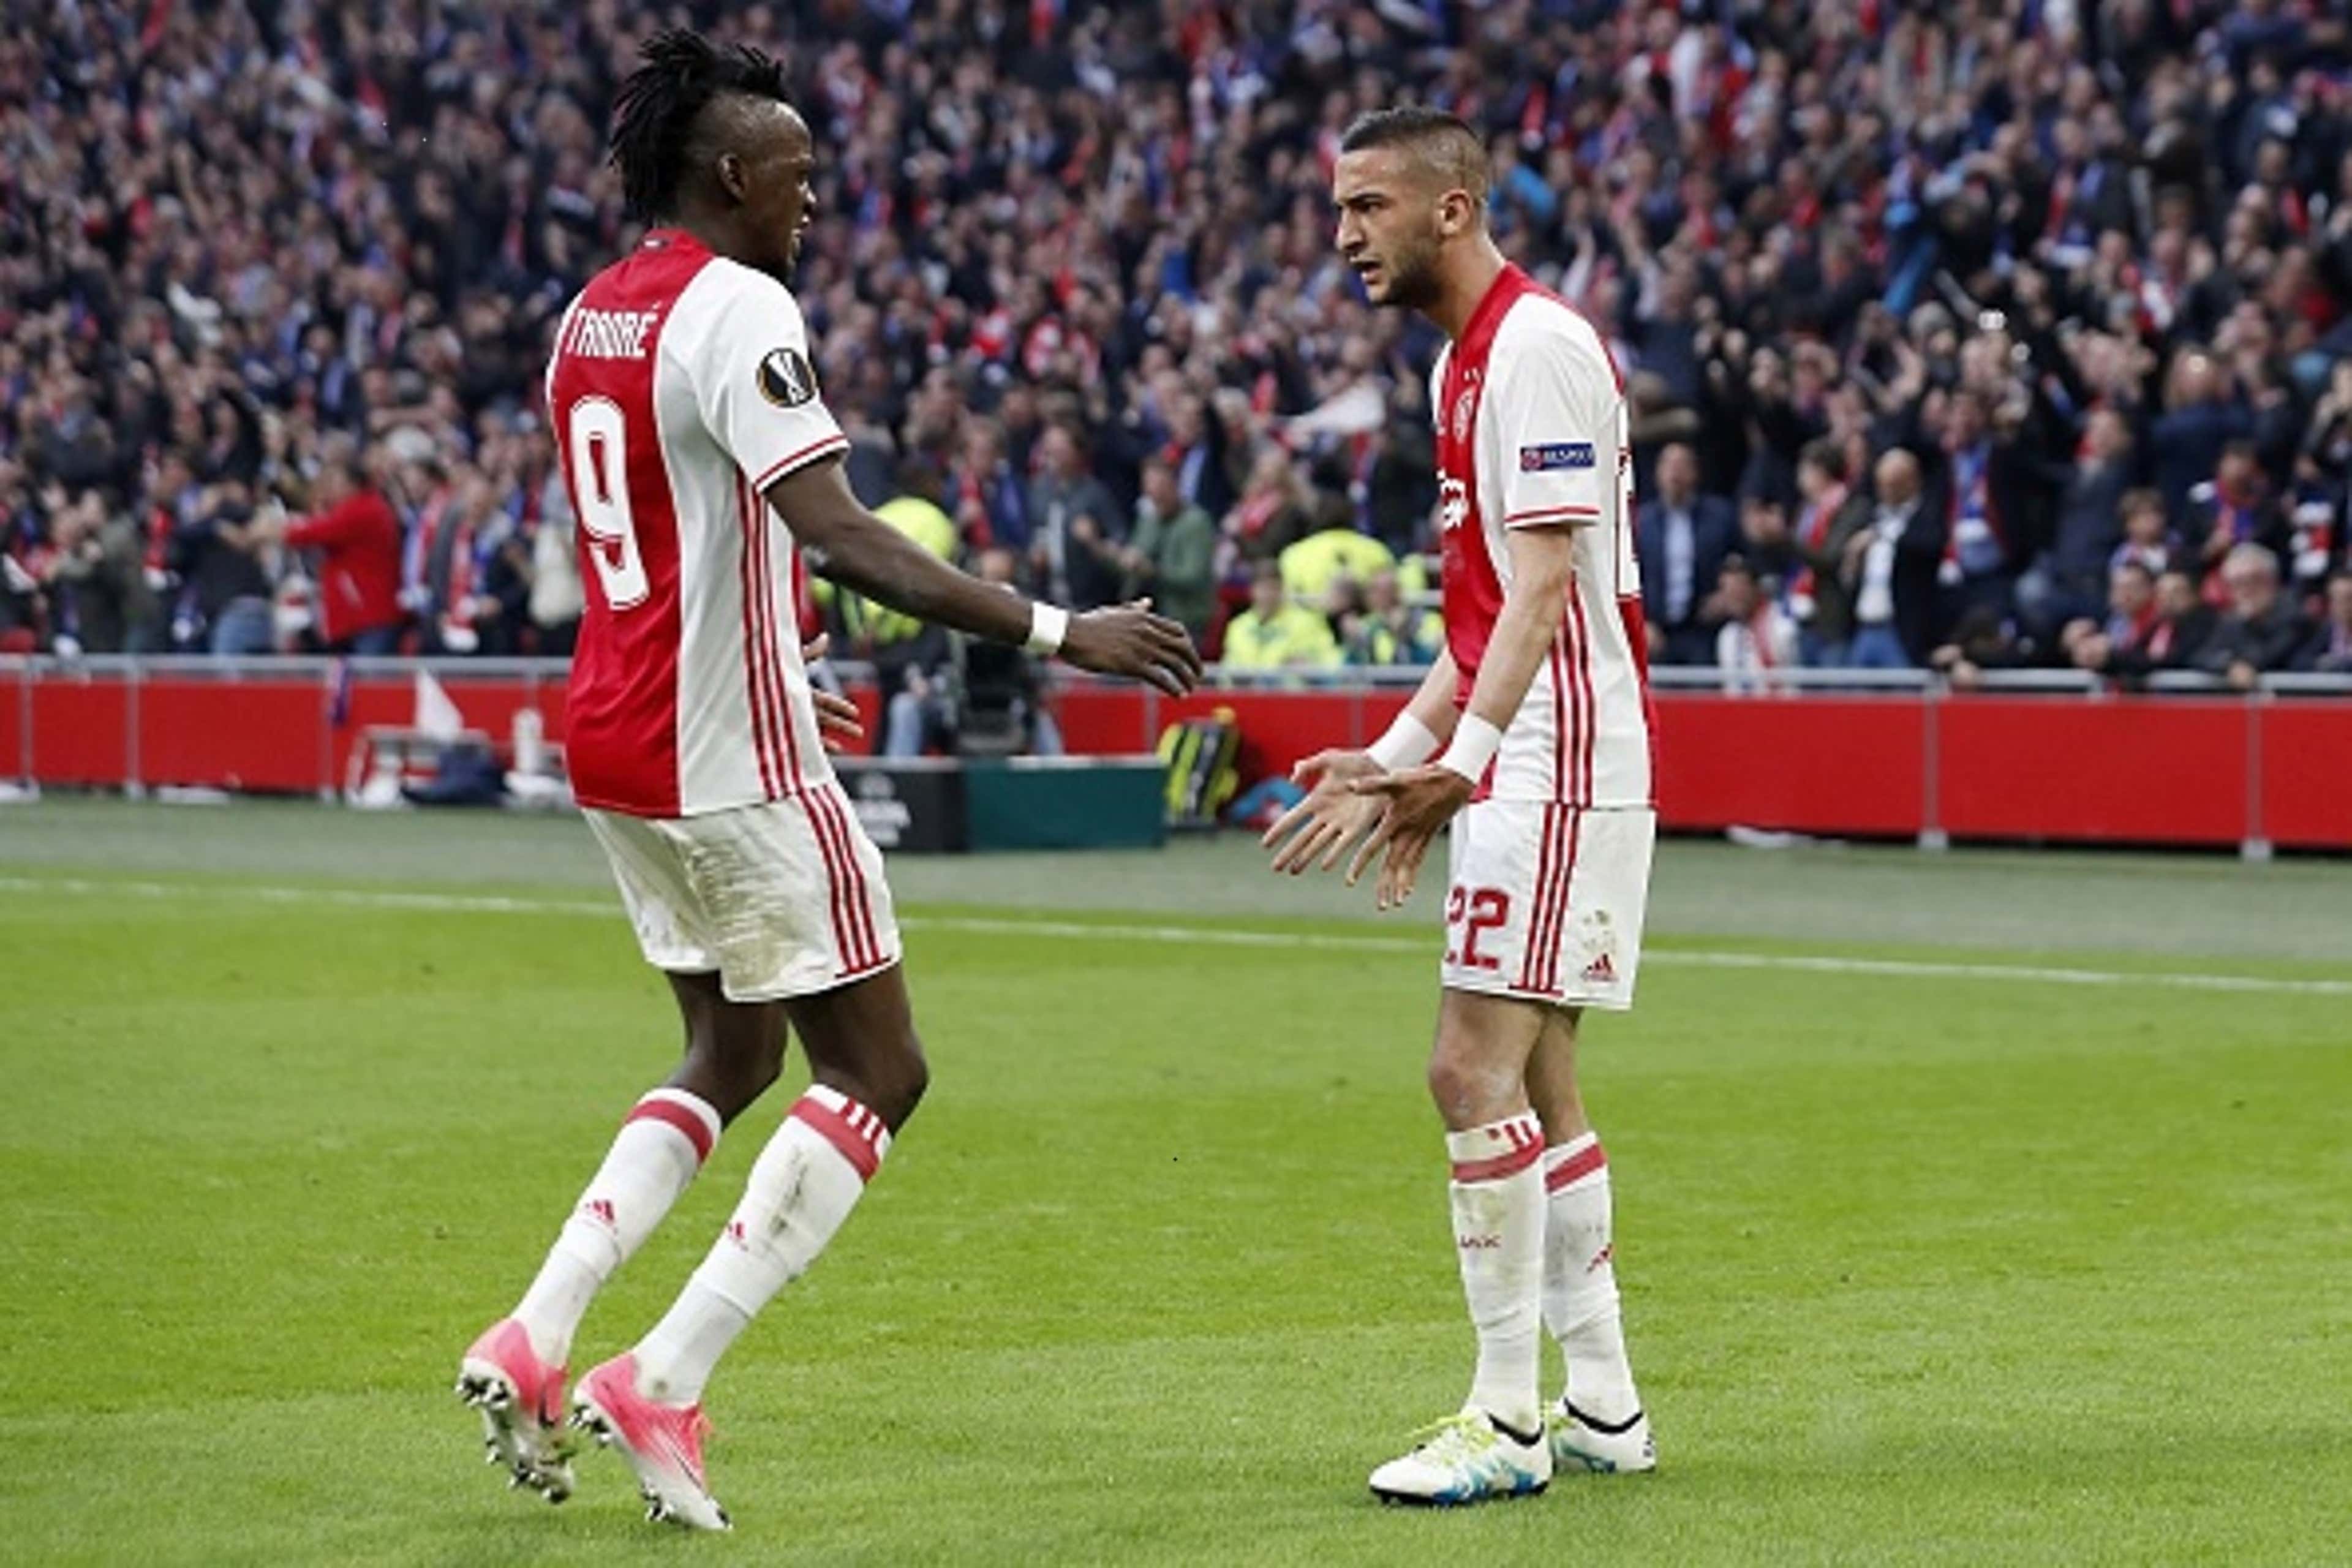 Bertrand Traore & Hakim Ziyech of Ajax during the UEFA Europa League semi-final match between Ajax Amsterdam and Olympique Lyonnais at the Amsterdam Arena on May 03, 2017 in Amsterdam